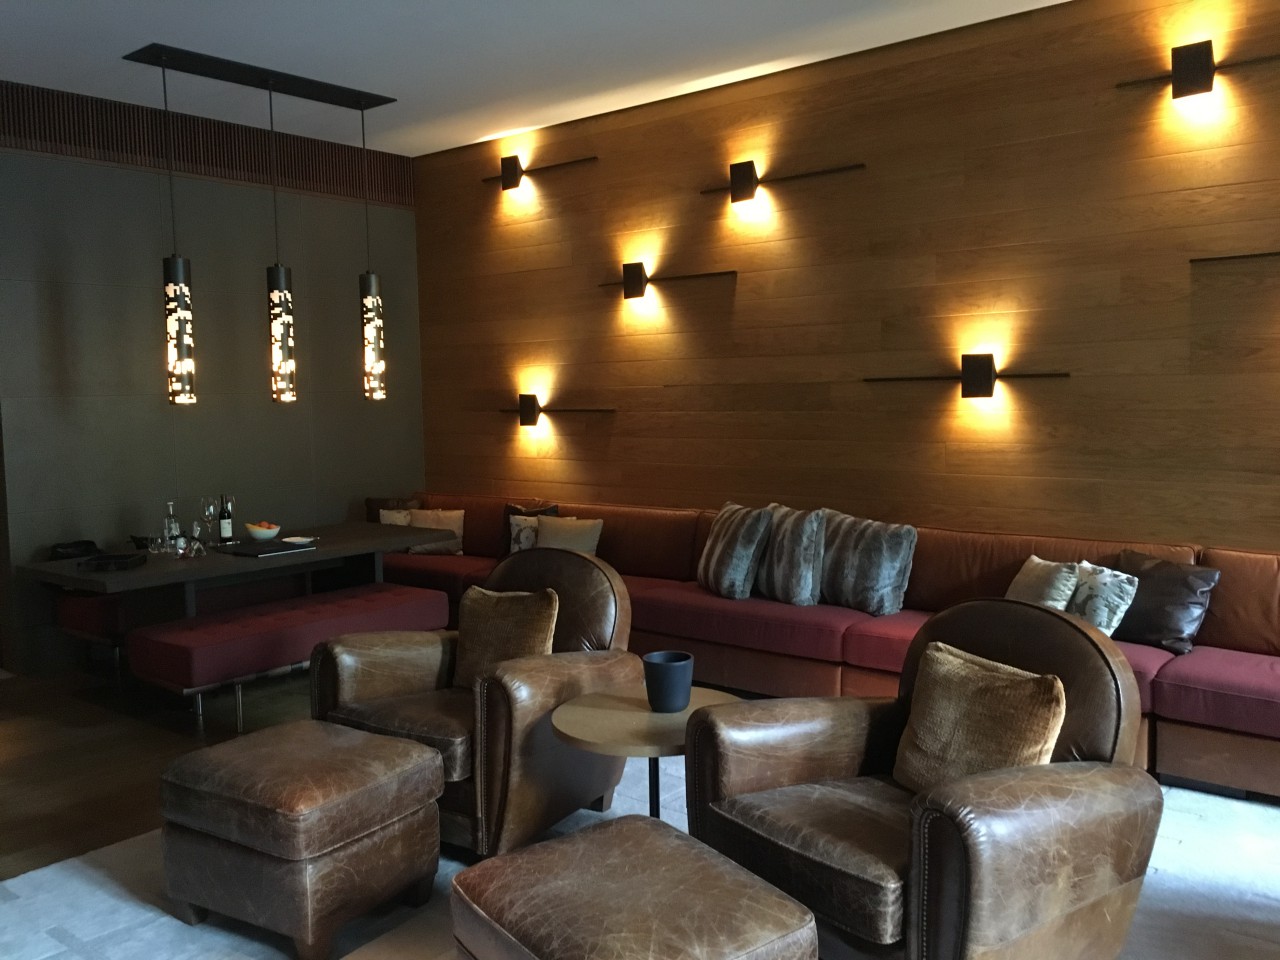 Deluxe Suite, The Chedi Andermatt﻿ Review